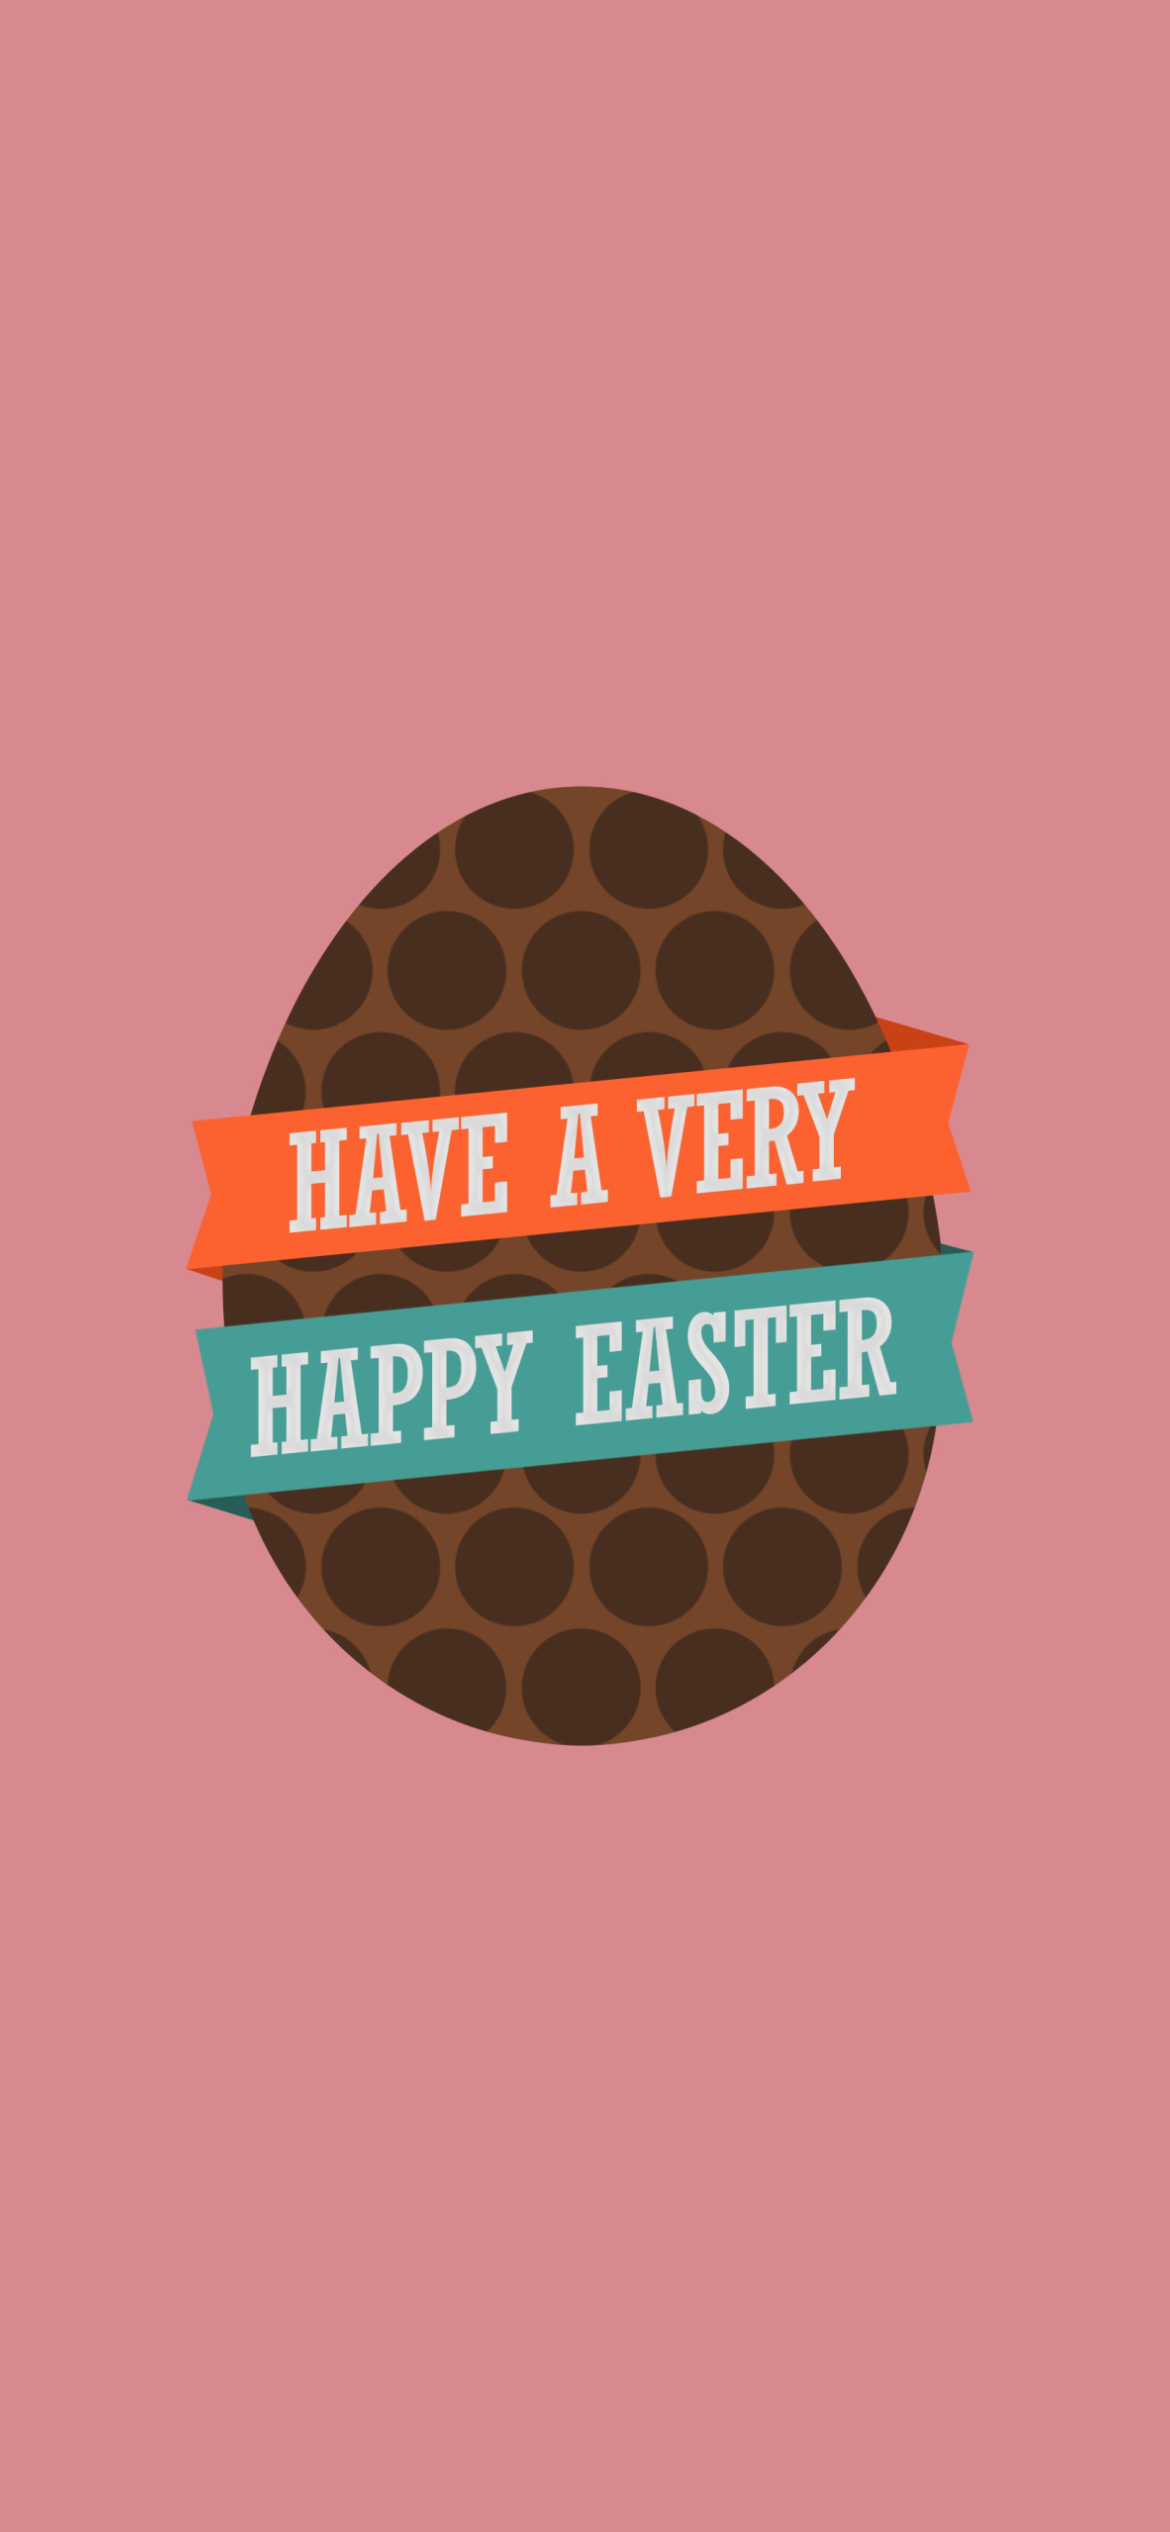 Very Happy Easter Egg wallpaper 1170x2532